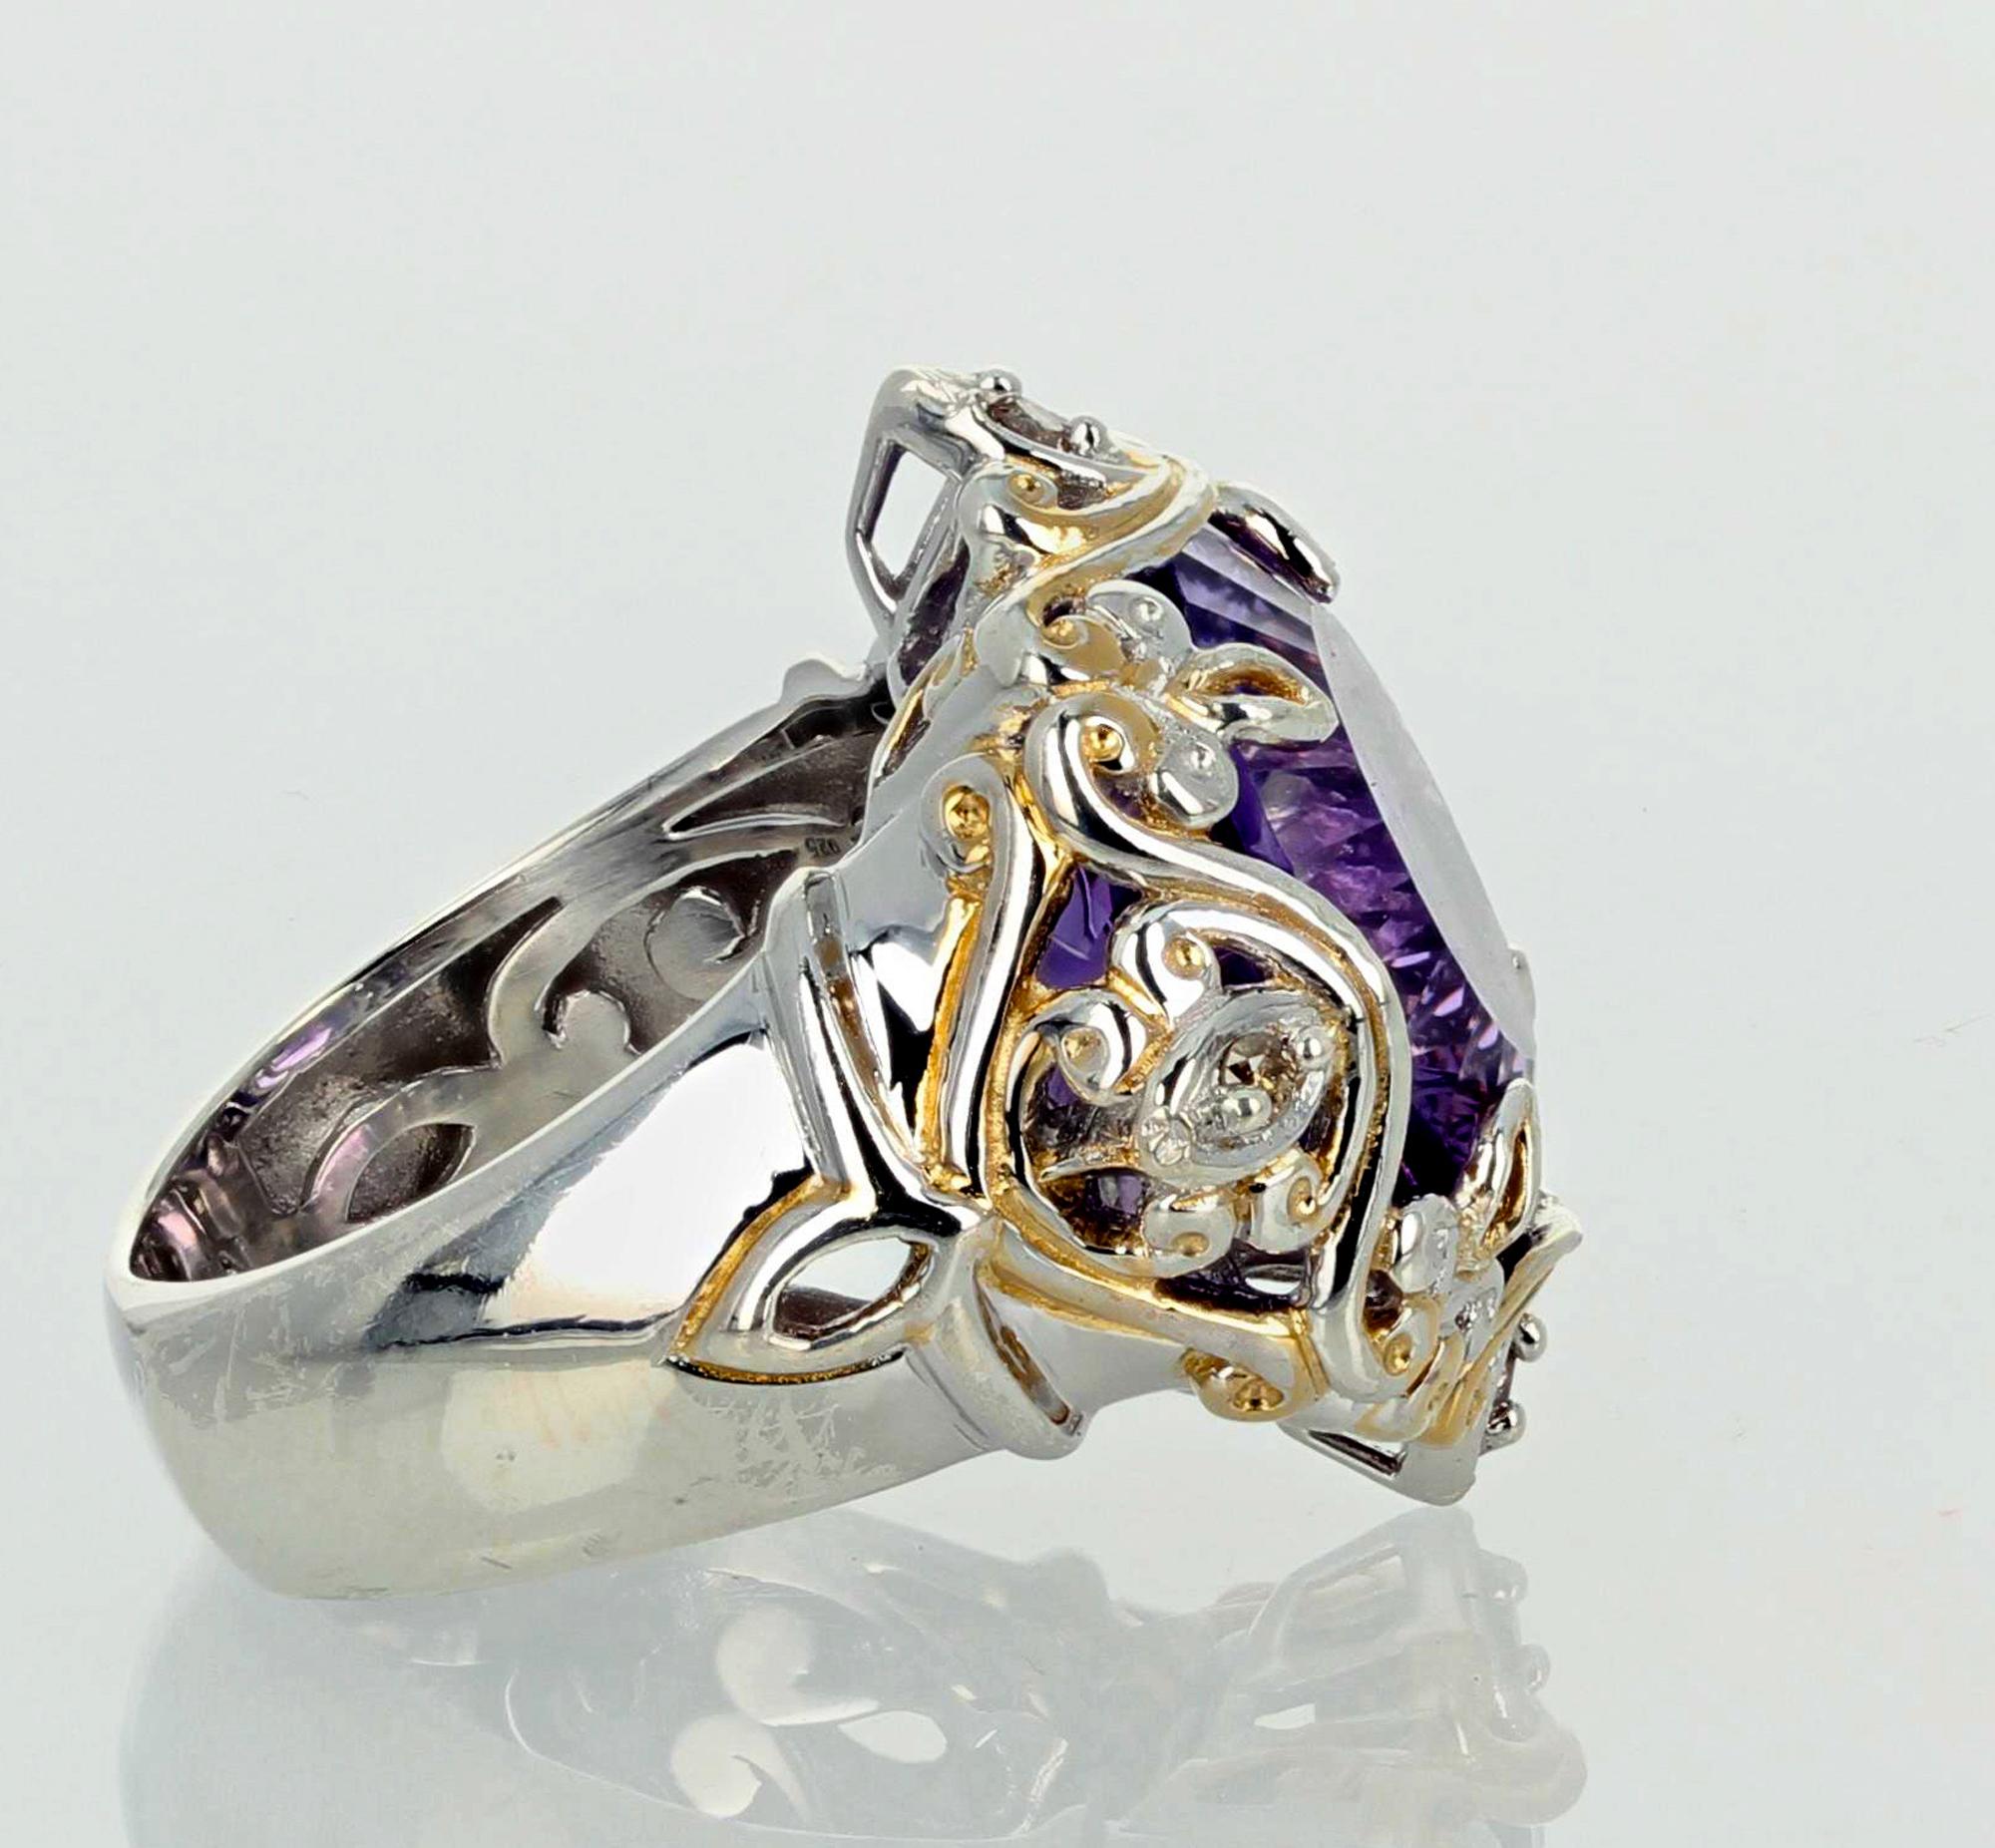 Round Cut AJD Famous Fantasy Cut 8.9Ct. Natural Amethyst Sterling Silver & Goldy Ring For Sale